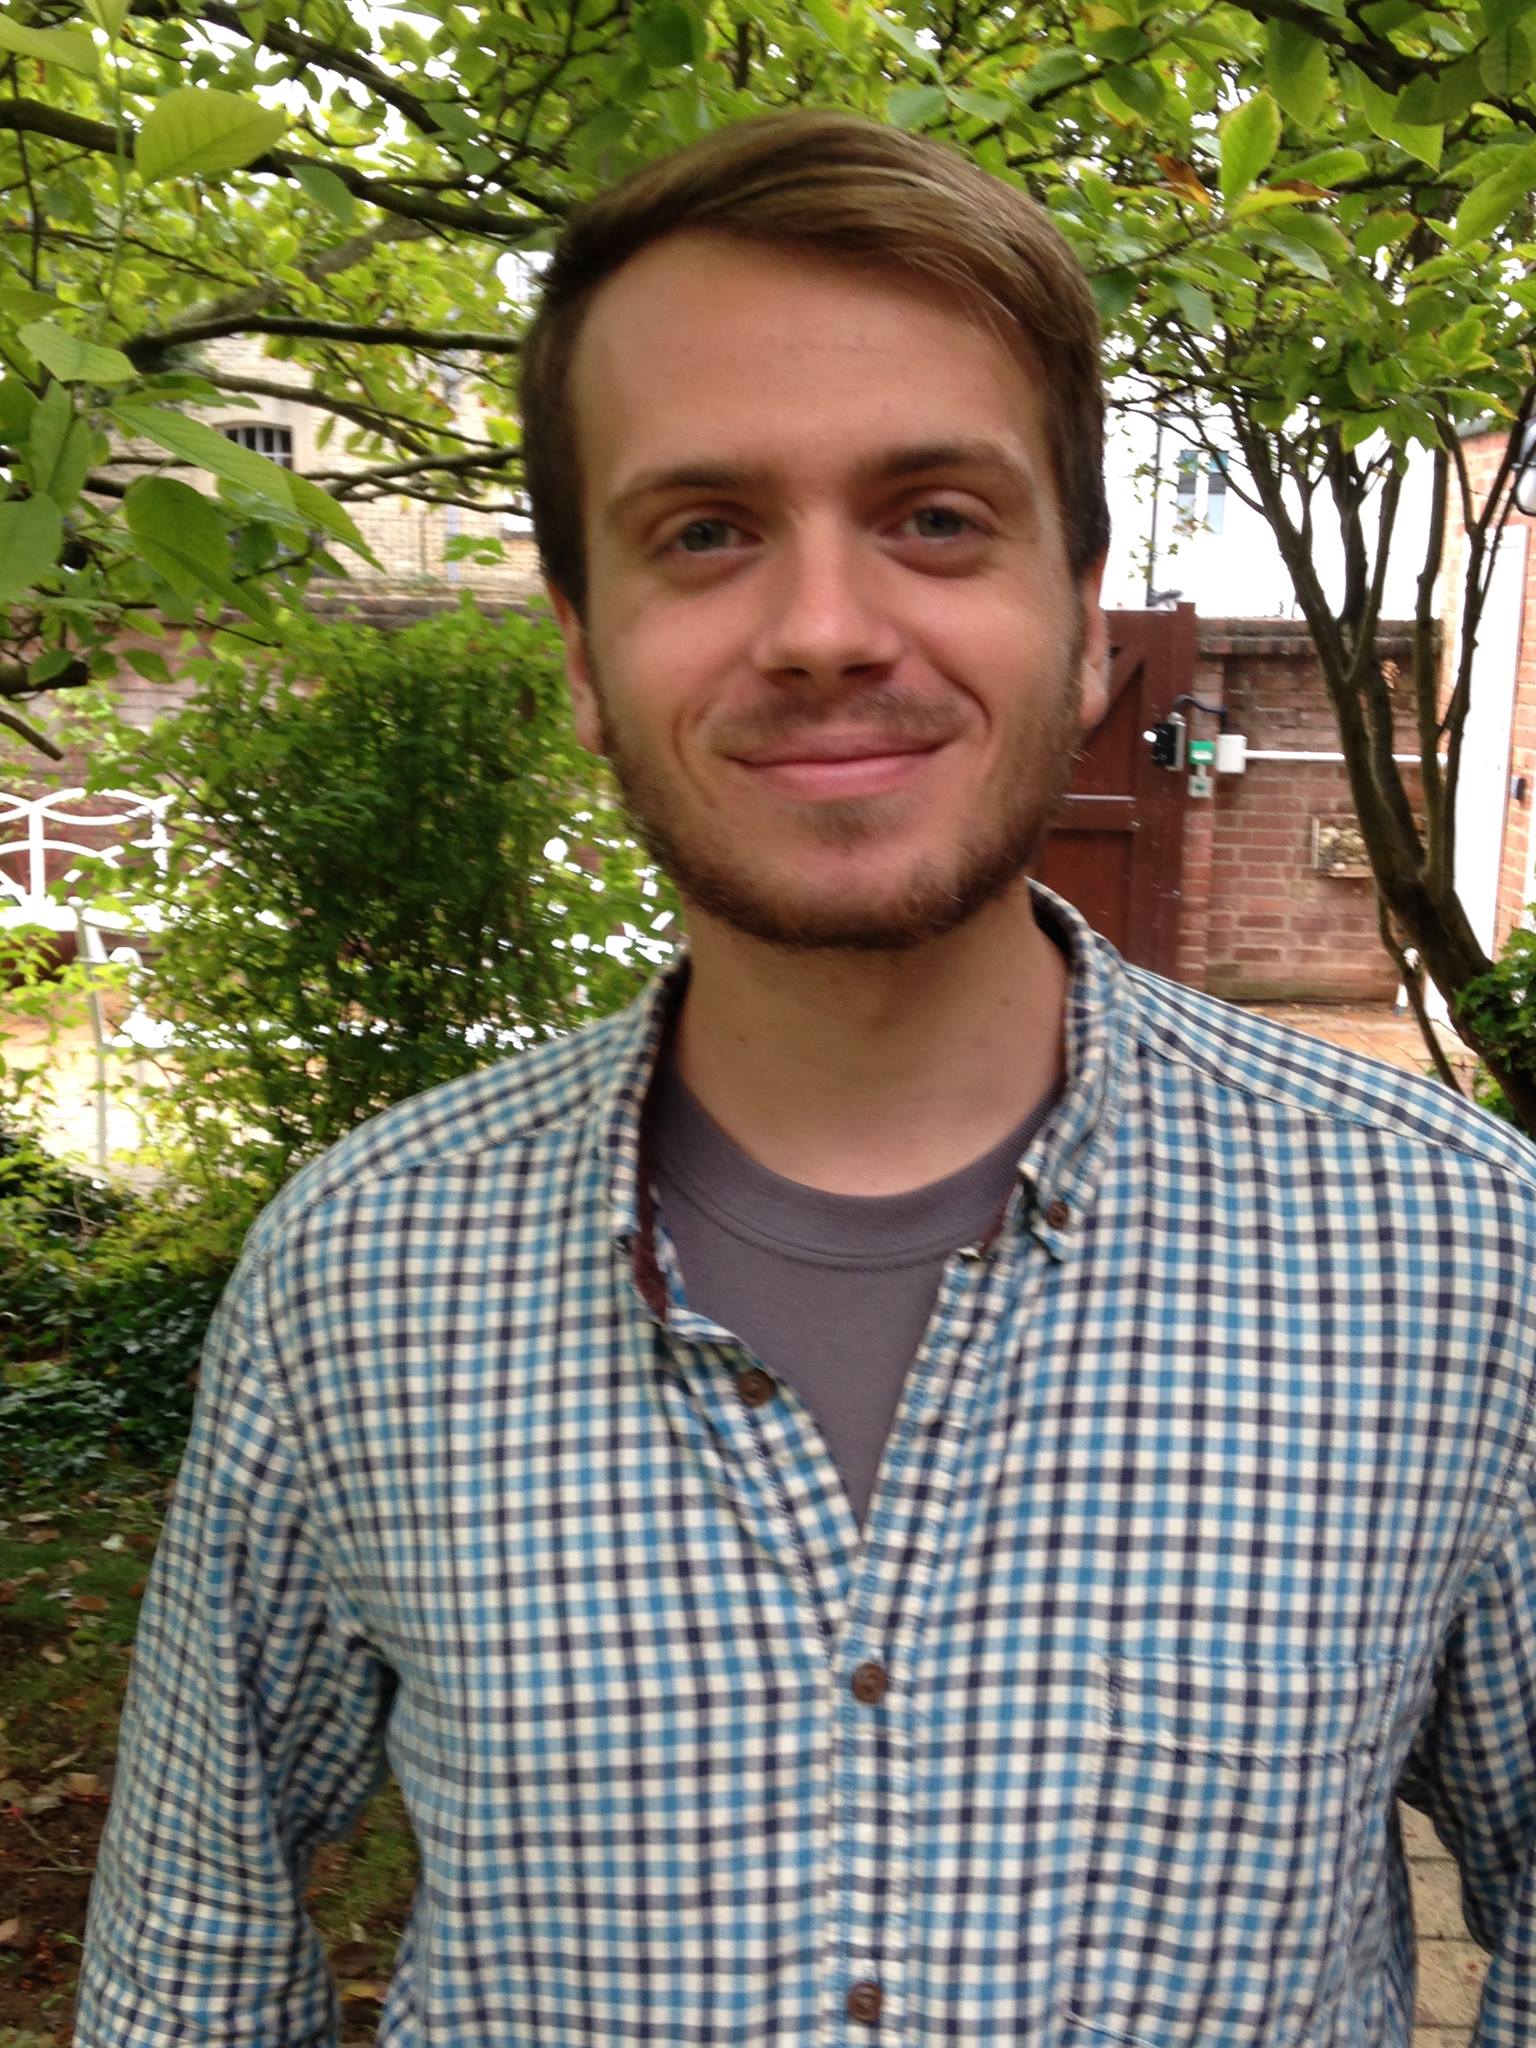 Silas Palmer fellowship recipient Benjamin Musachio is currently a Stanford undergraduate student whose research focuses on Slavic languages and literature.